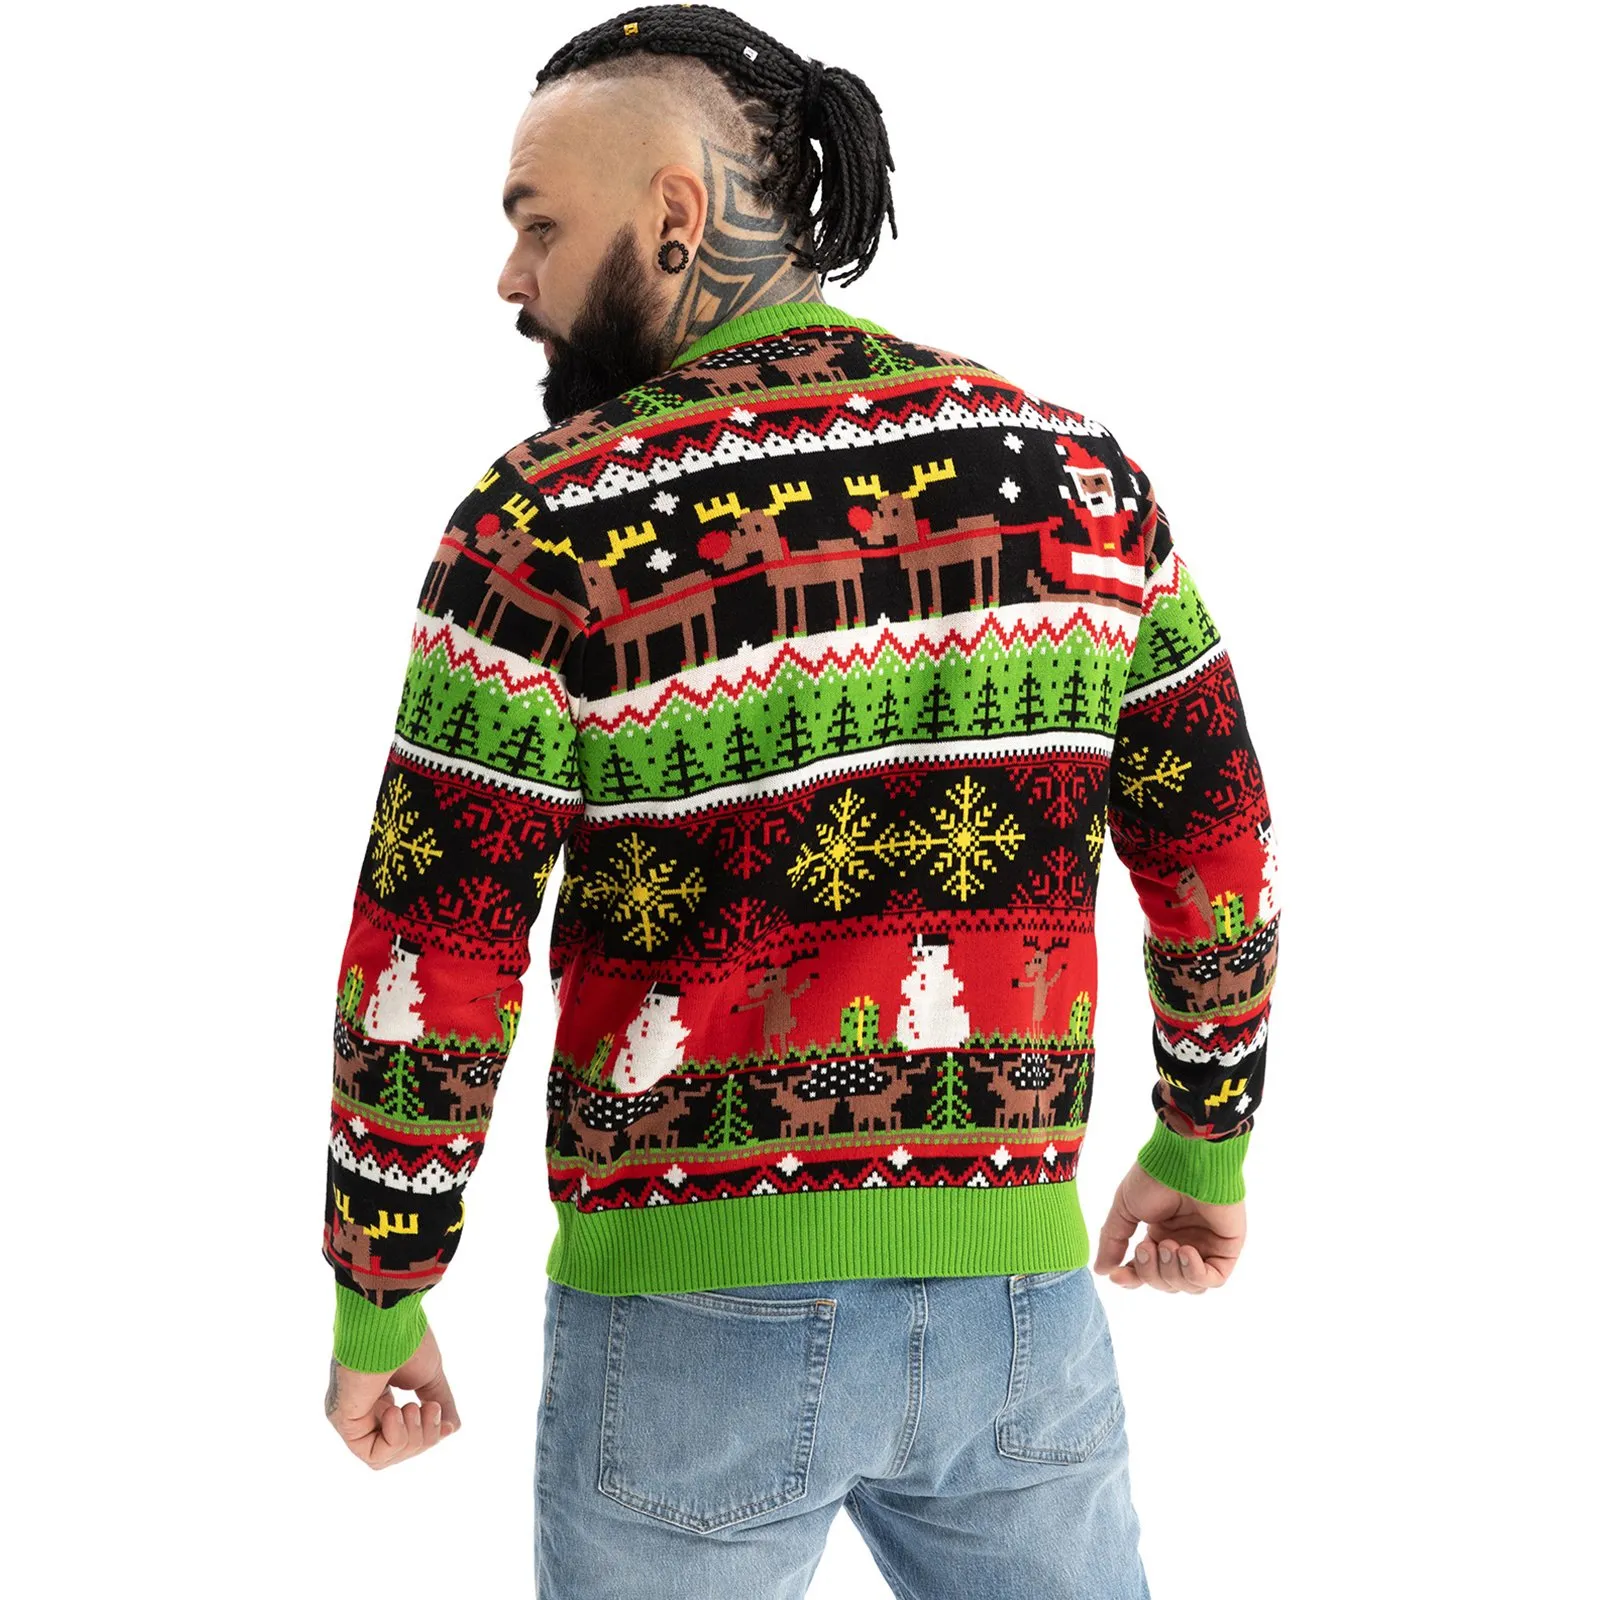 Sleighbells Ringing Funny Ugly Mens LED Christmas Sweater